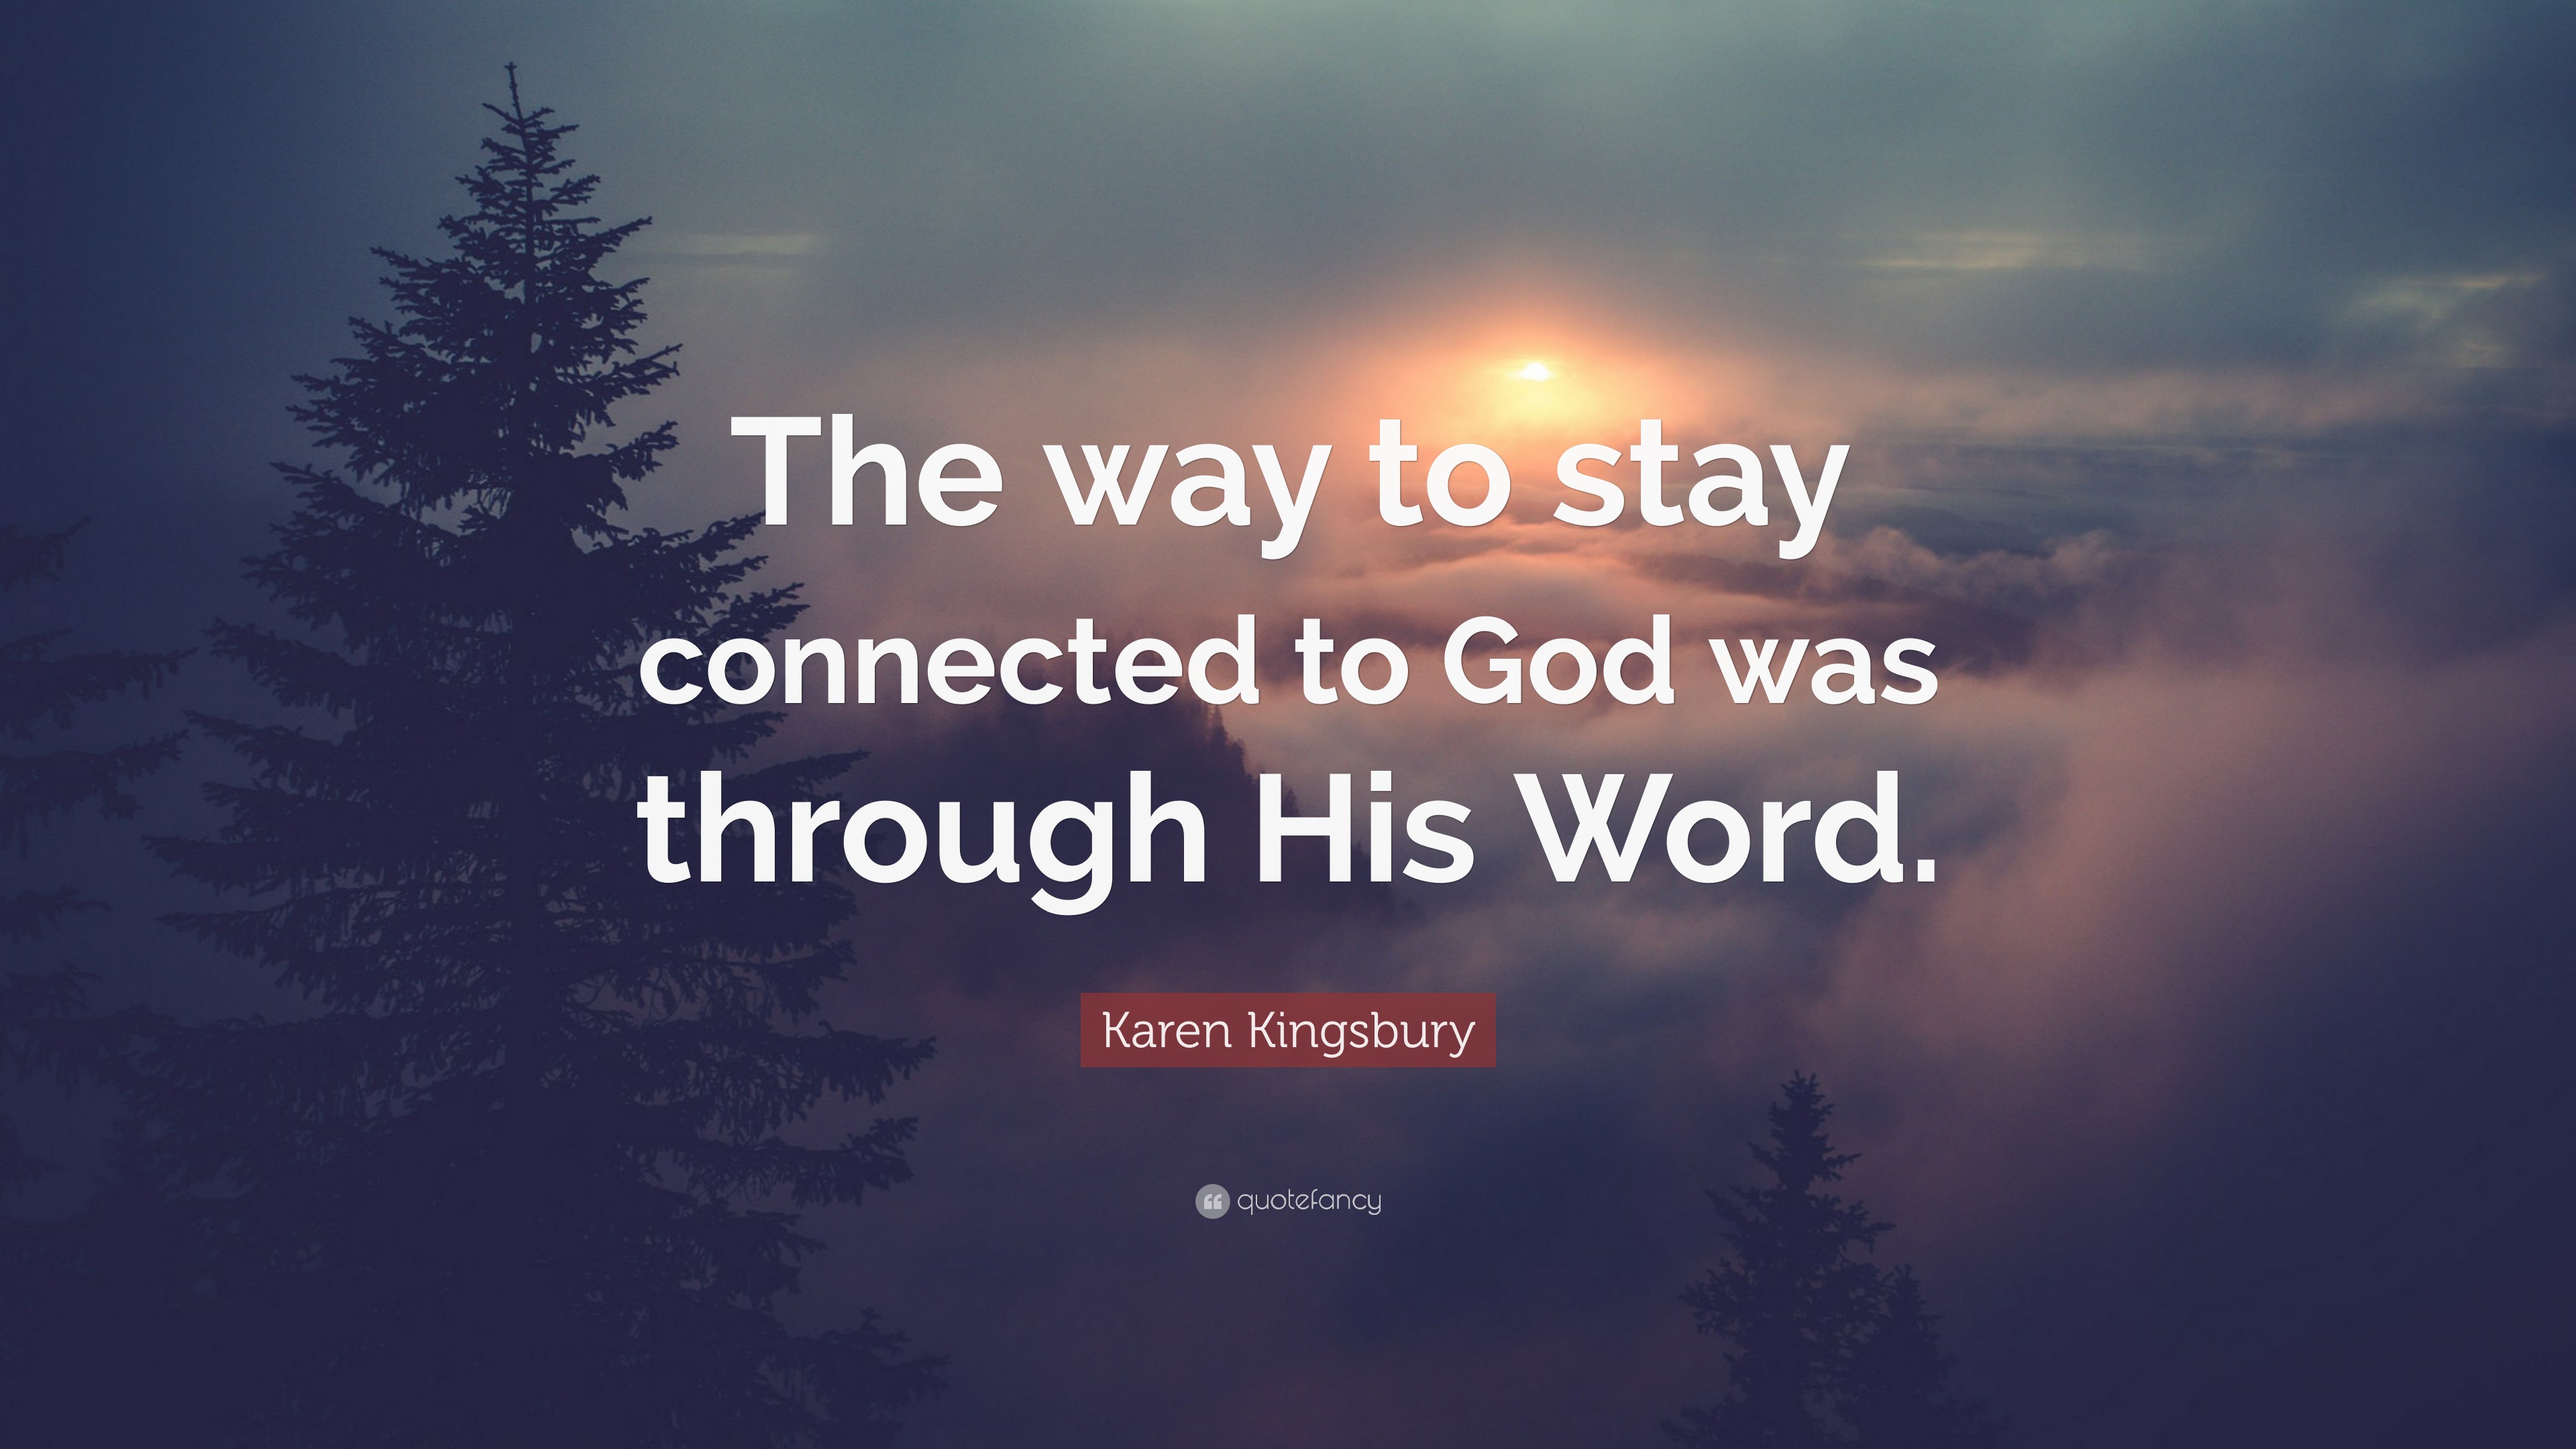 get connected to god